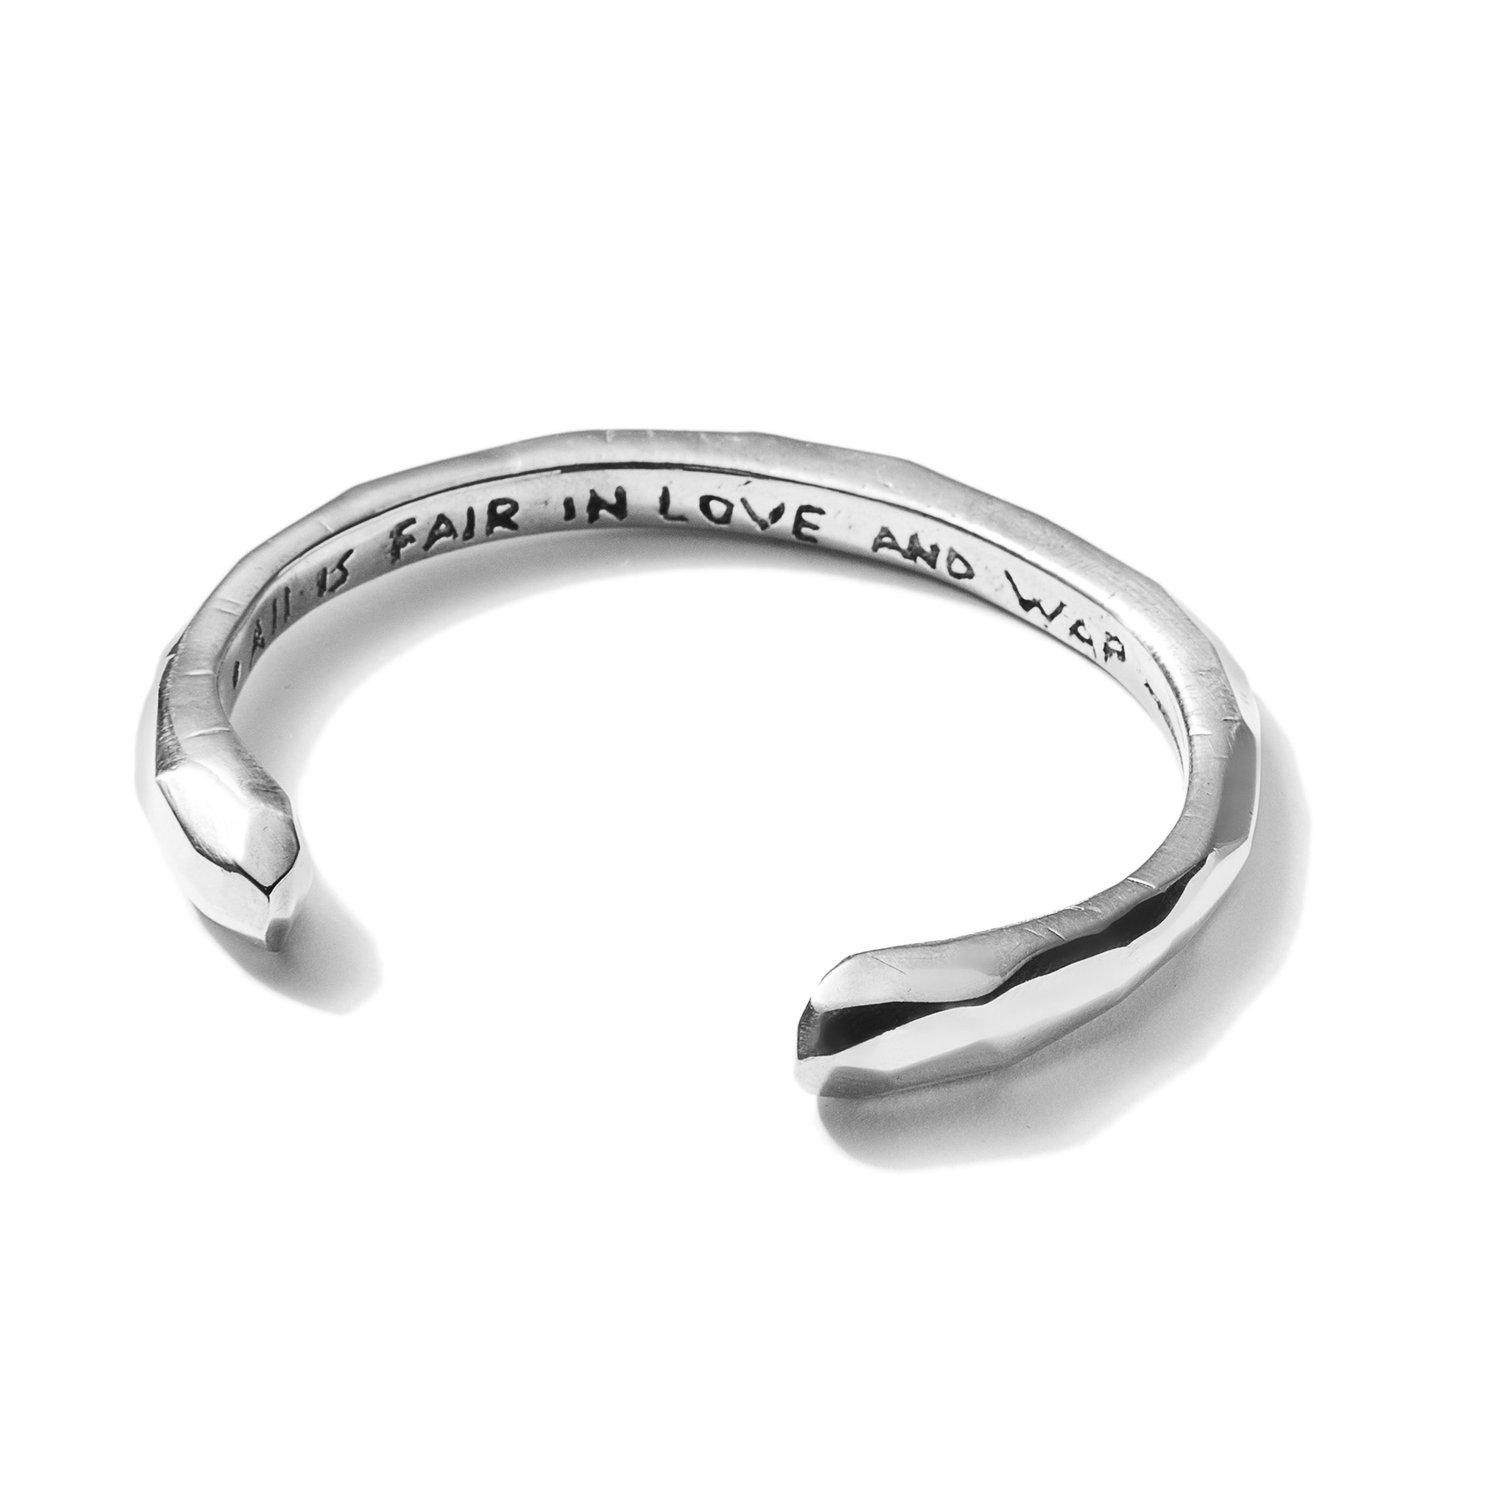 Image of All is Fair in Love and War Bracelet